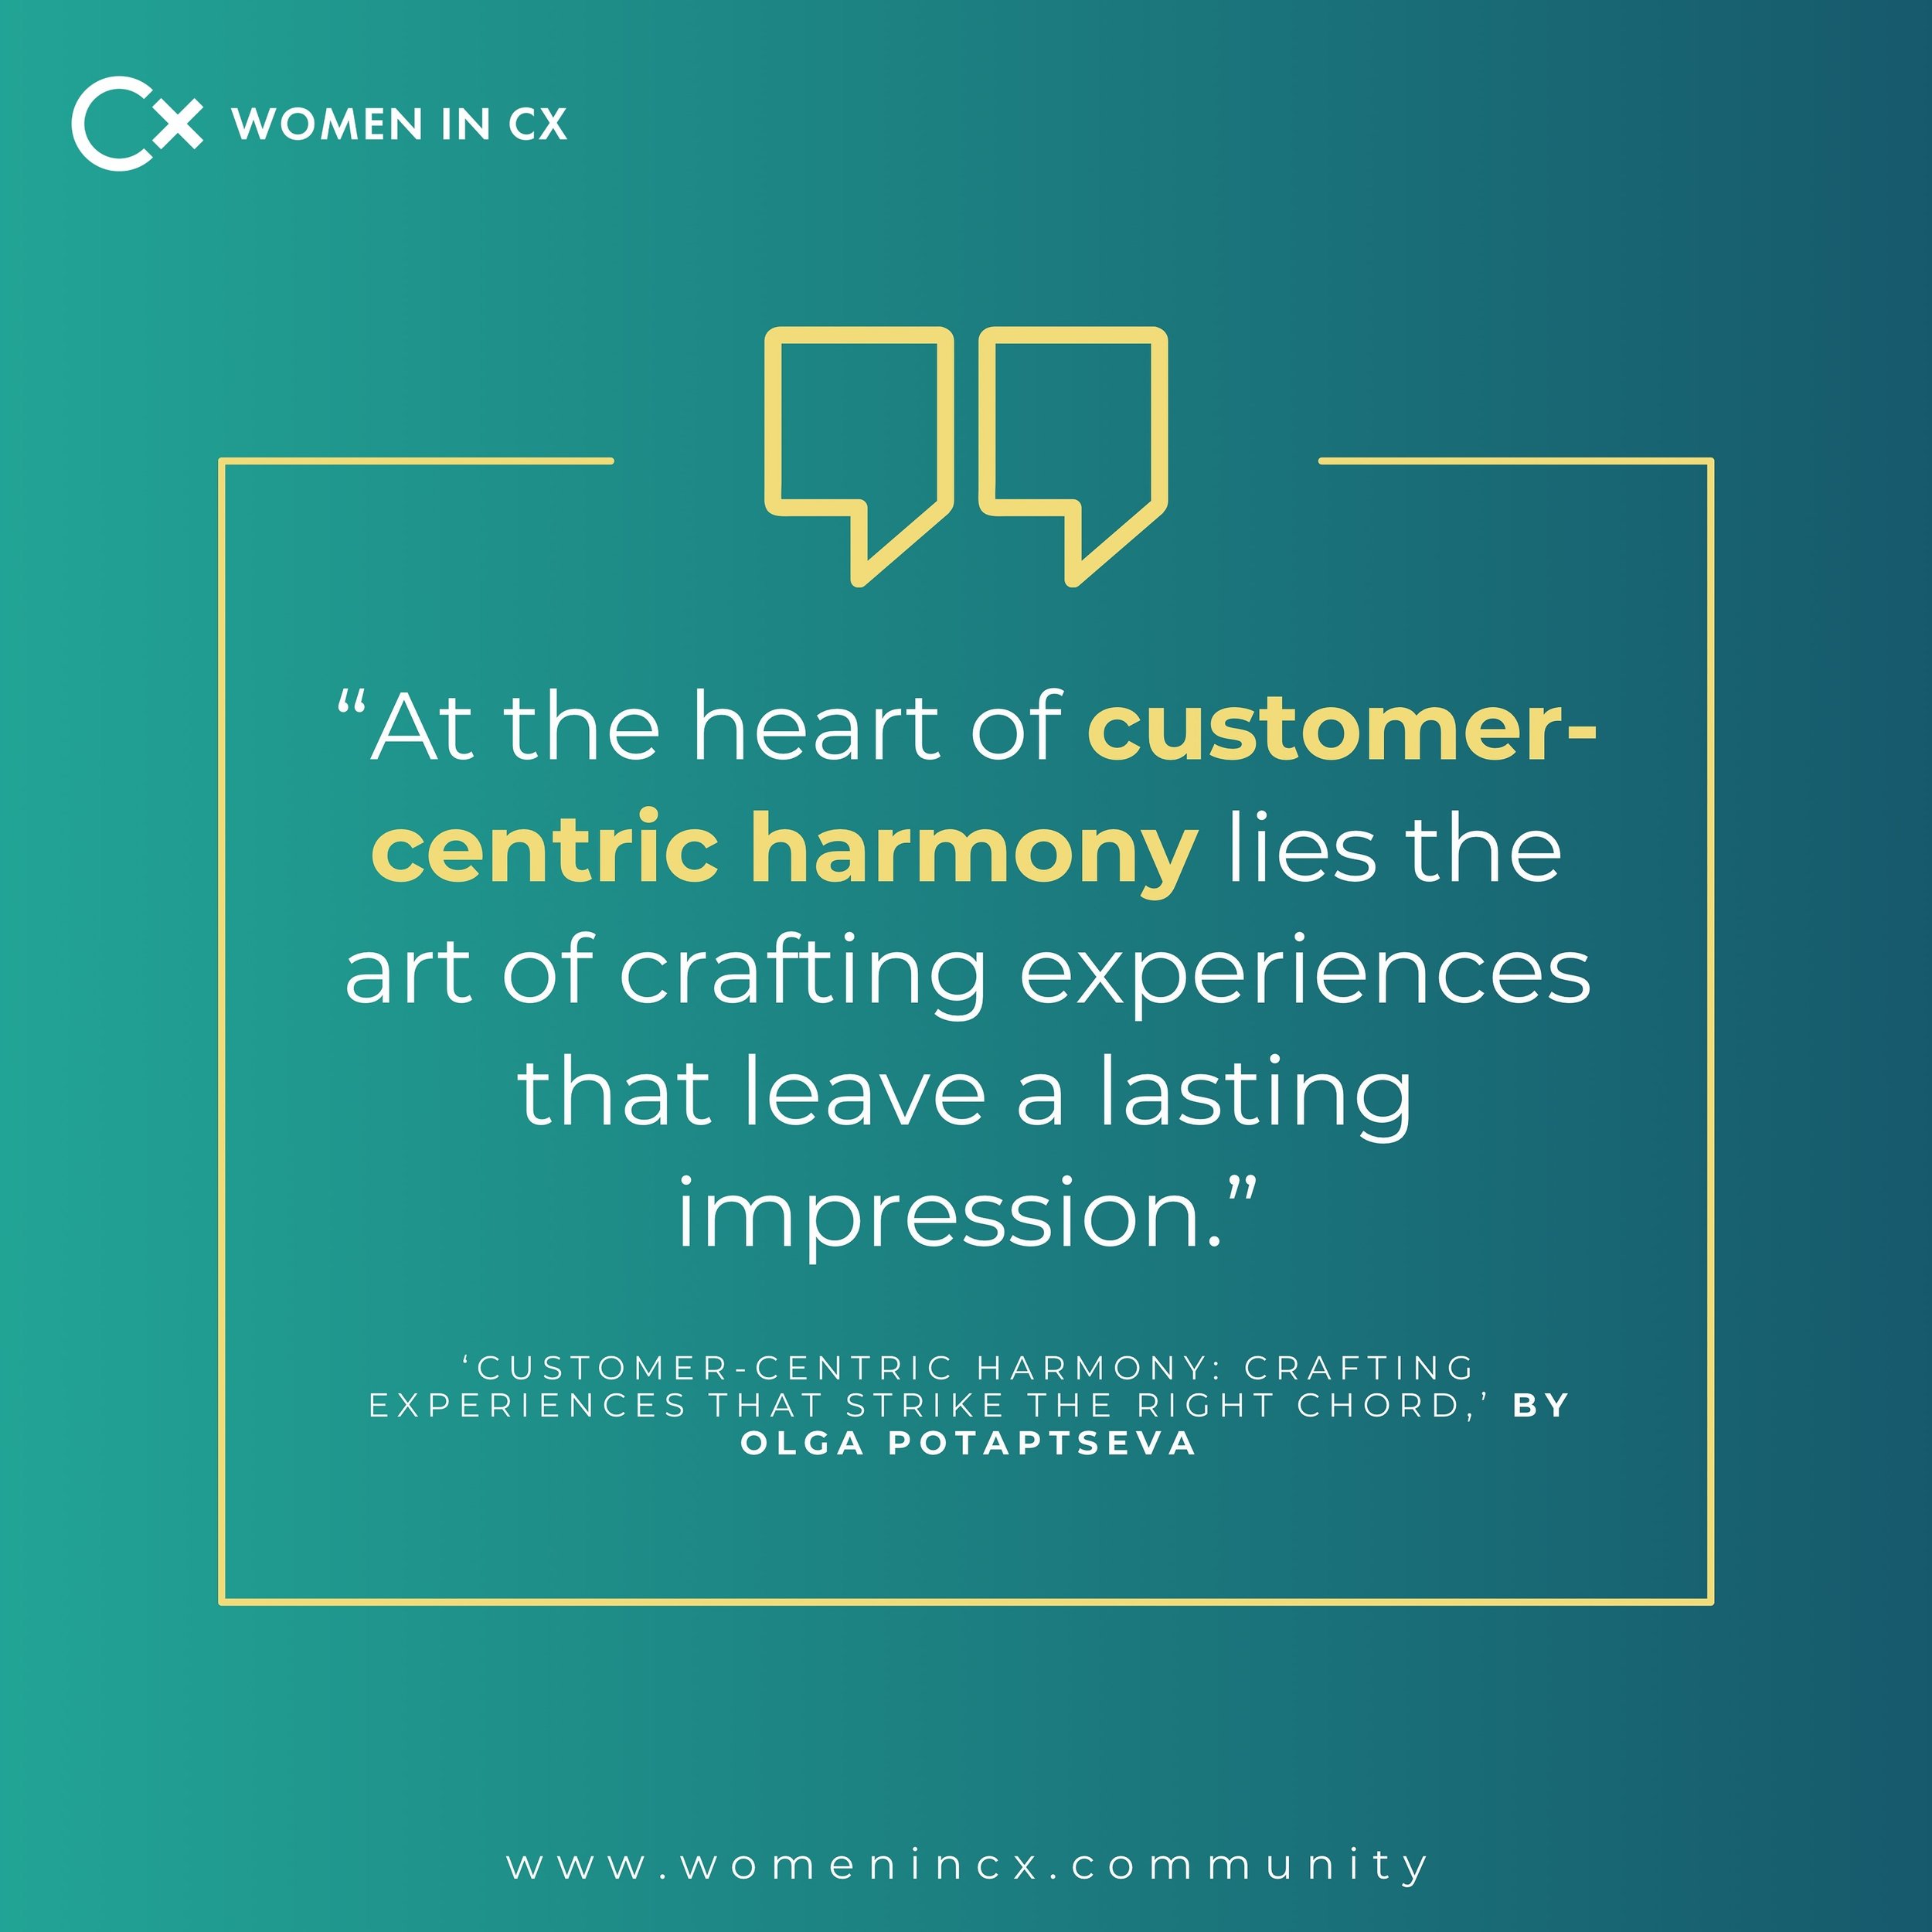 What does it take for an organisation to really engage their customers? 🤔
&nbsp;
In our latest article, &lsquo;Customer-Centric Harmony: Crafting Experiences That Strike the Right Chord&rsquo;, Olga Potaptseva, CEO of the European Customer Consultan